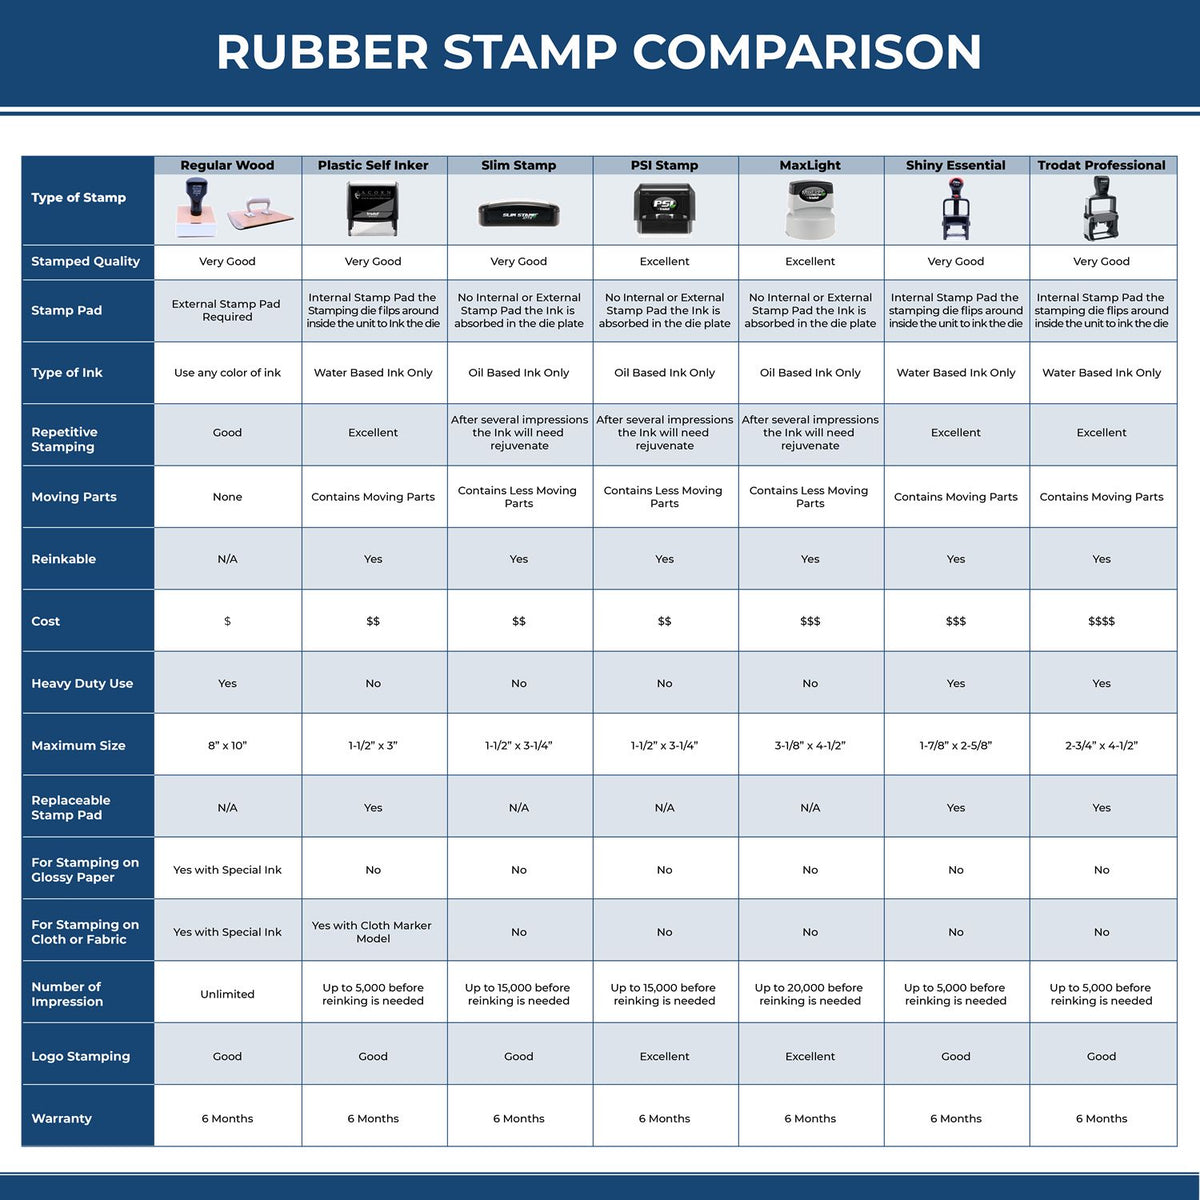 A comparison chart for the different types of mount models available for the Super Slim New Mexico Notary Public Stamp.